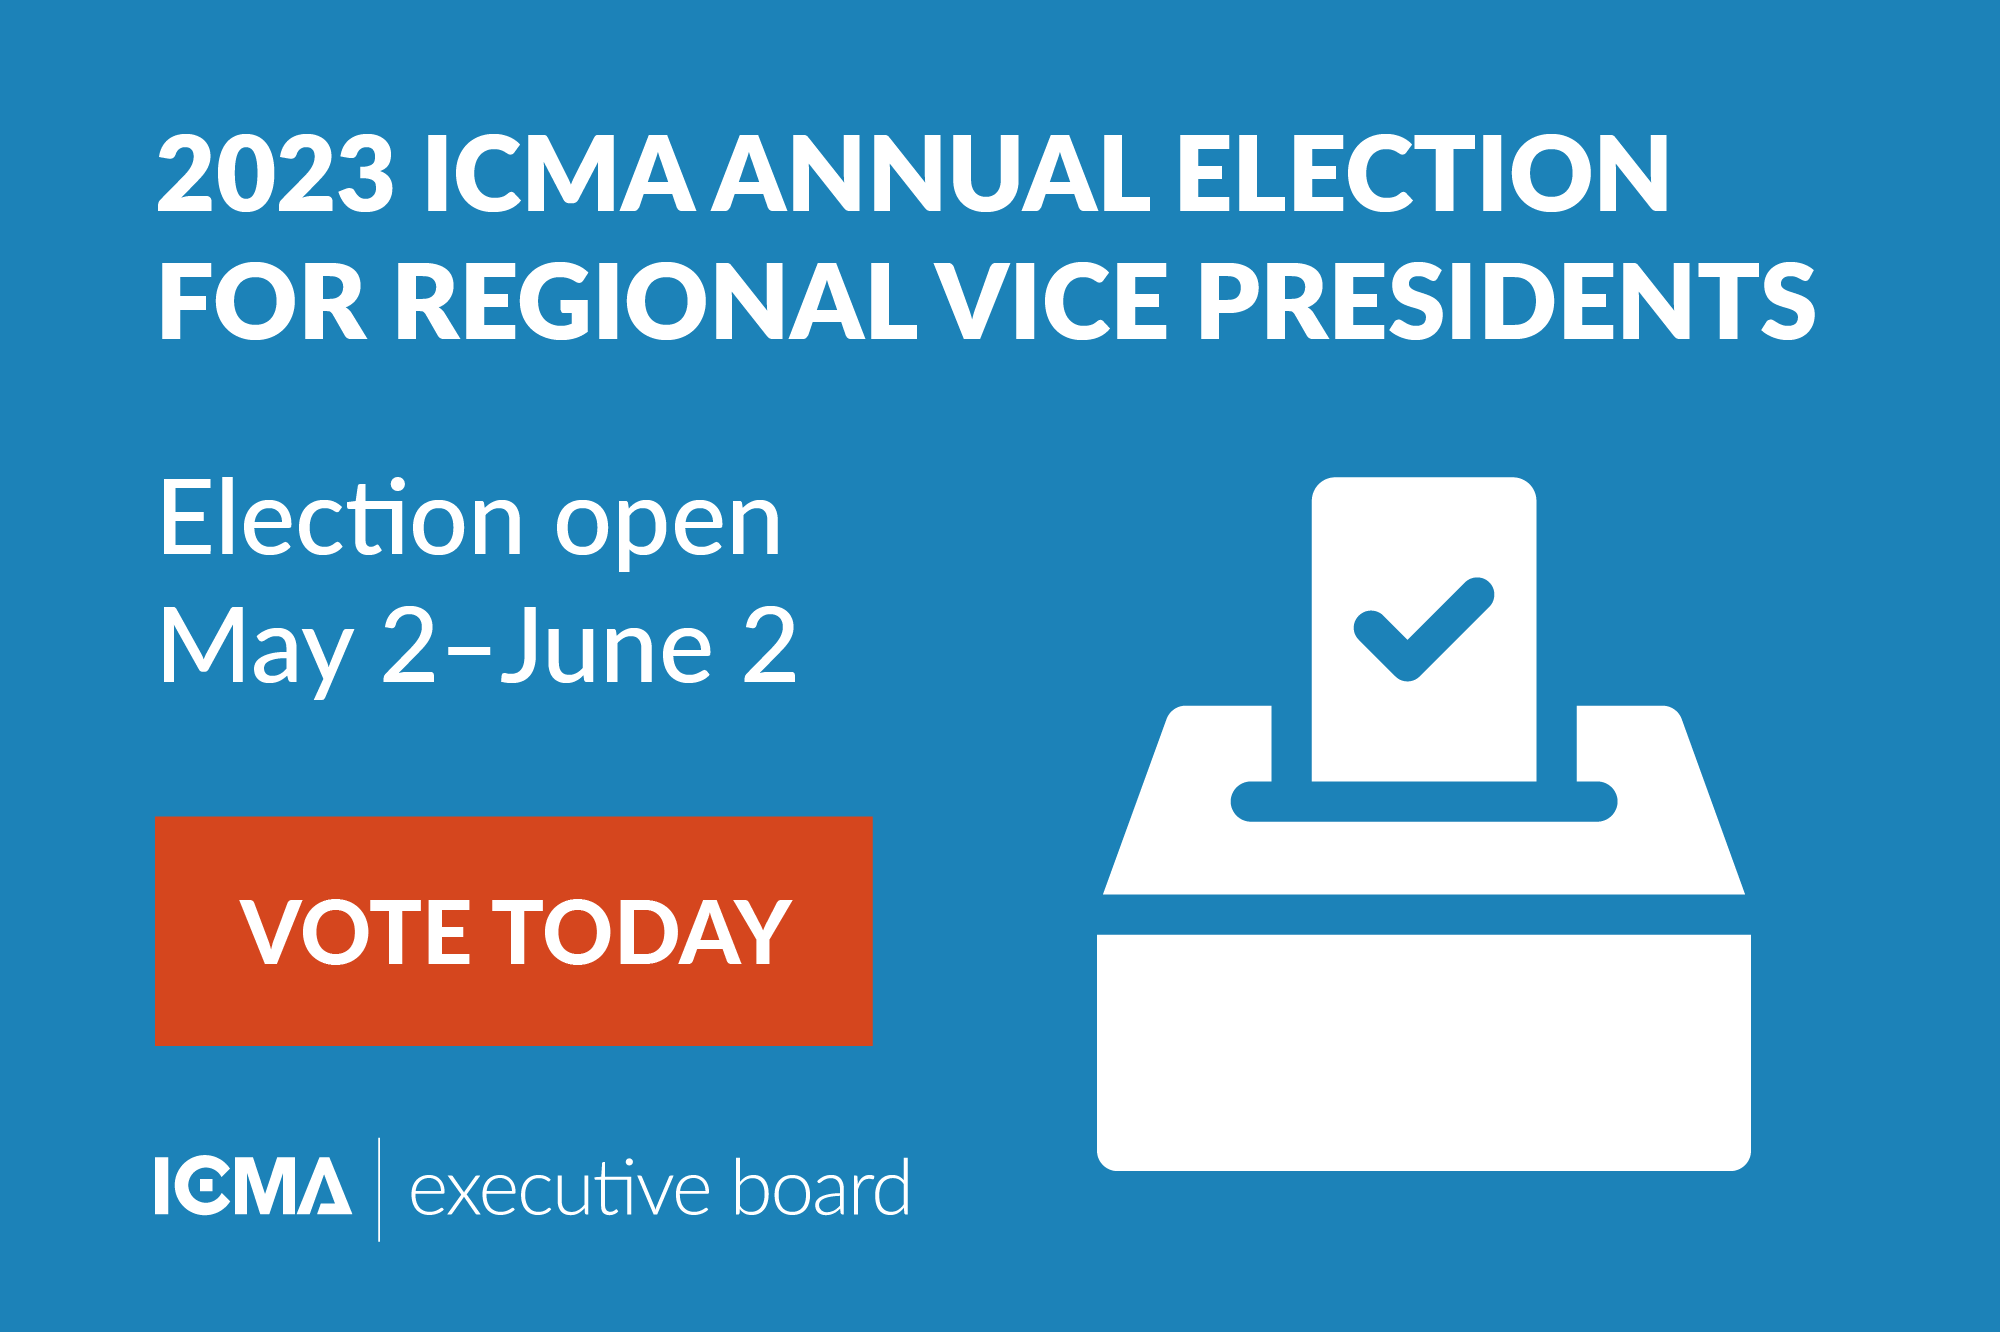 2023 Annual Election for Regional Vice Presidents